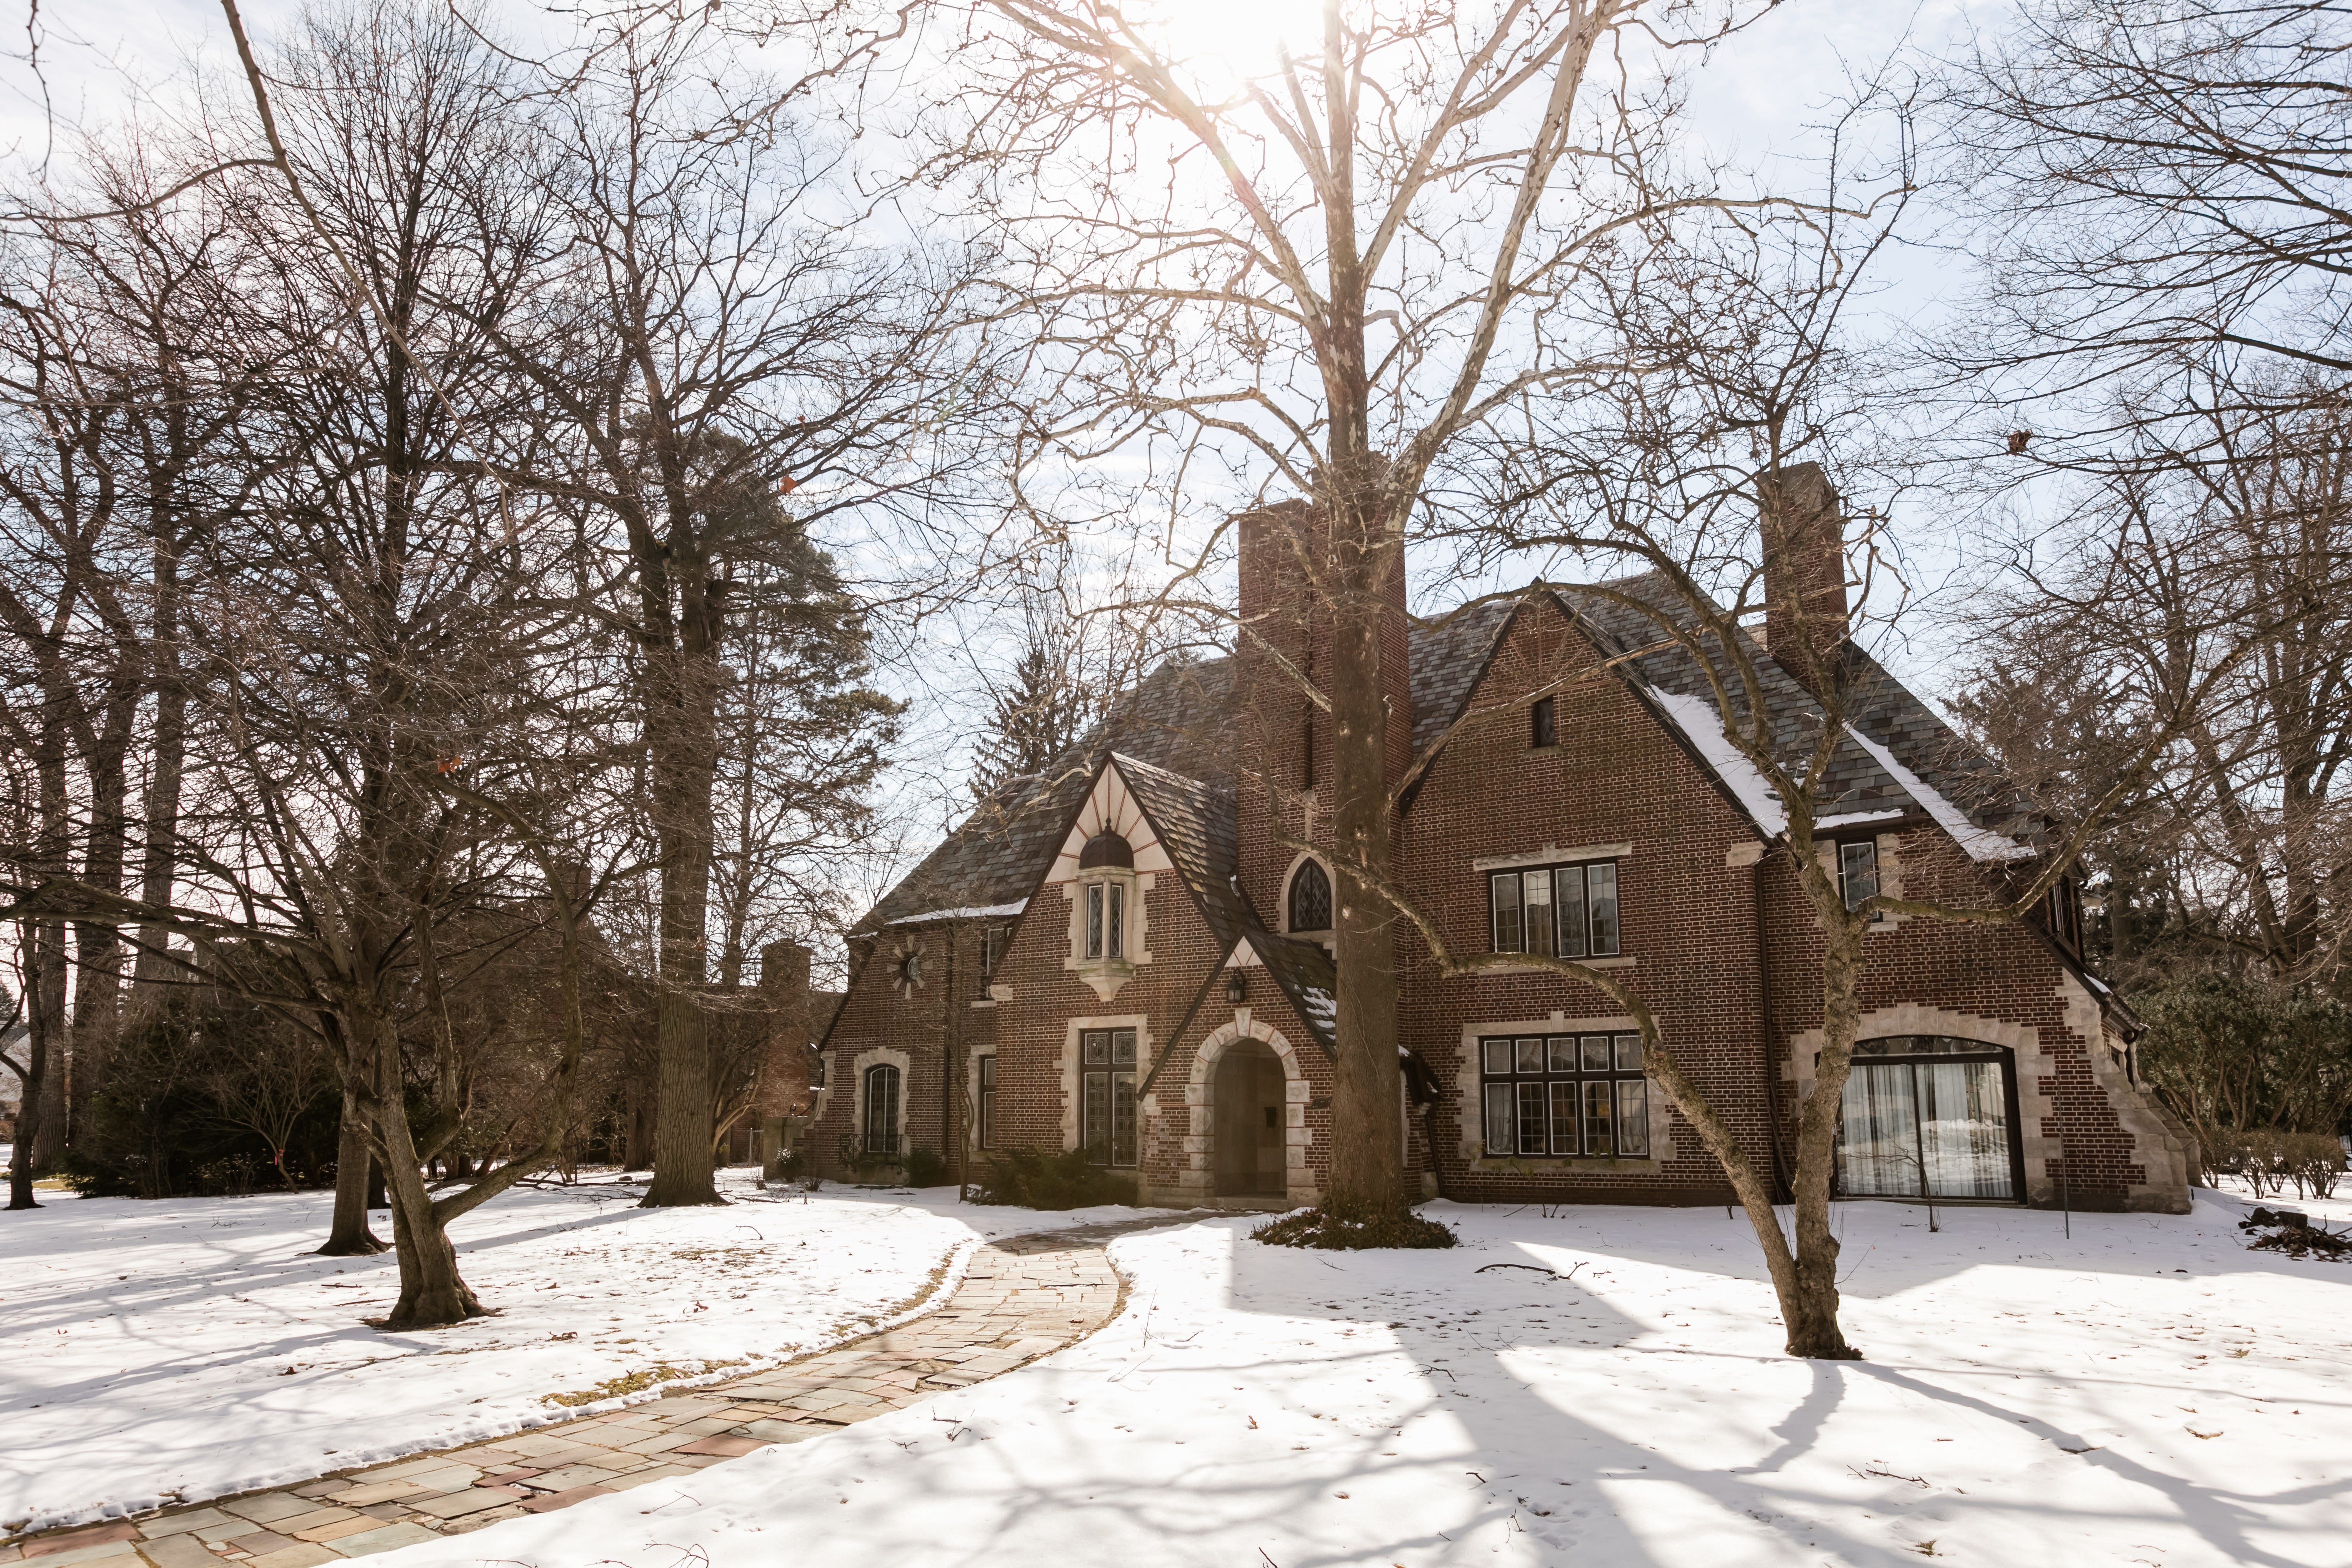 With its unique craftsmanship and architectural design, realtor Treder added, "The home/estate captures the 'American Estate Living' of years gone by, including a rare carriage house."